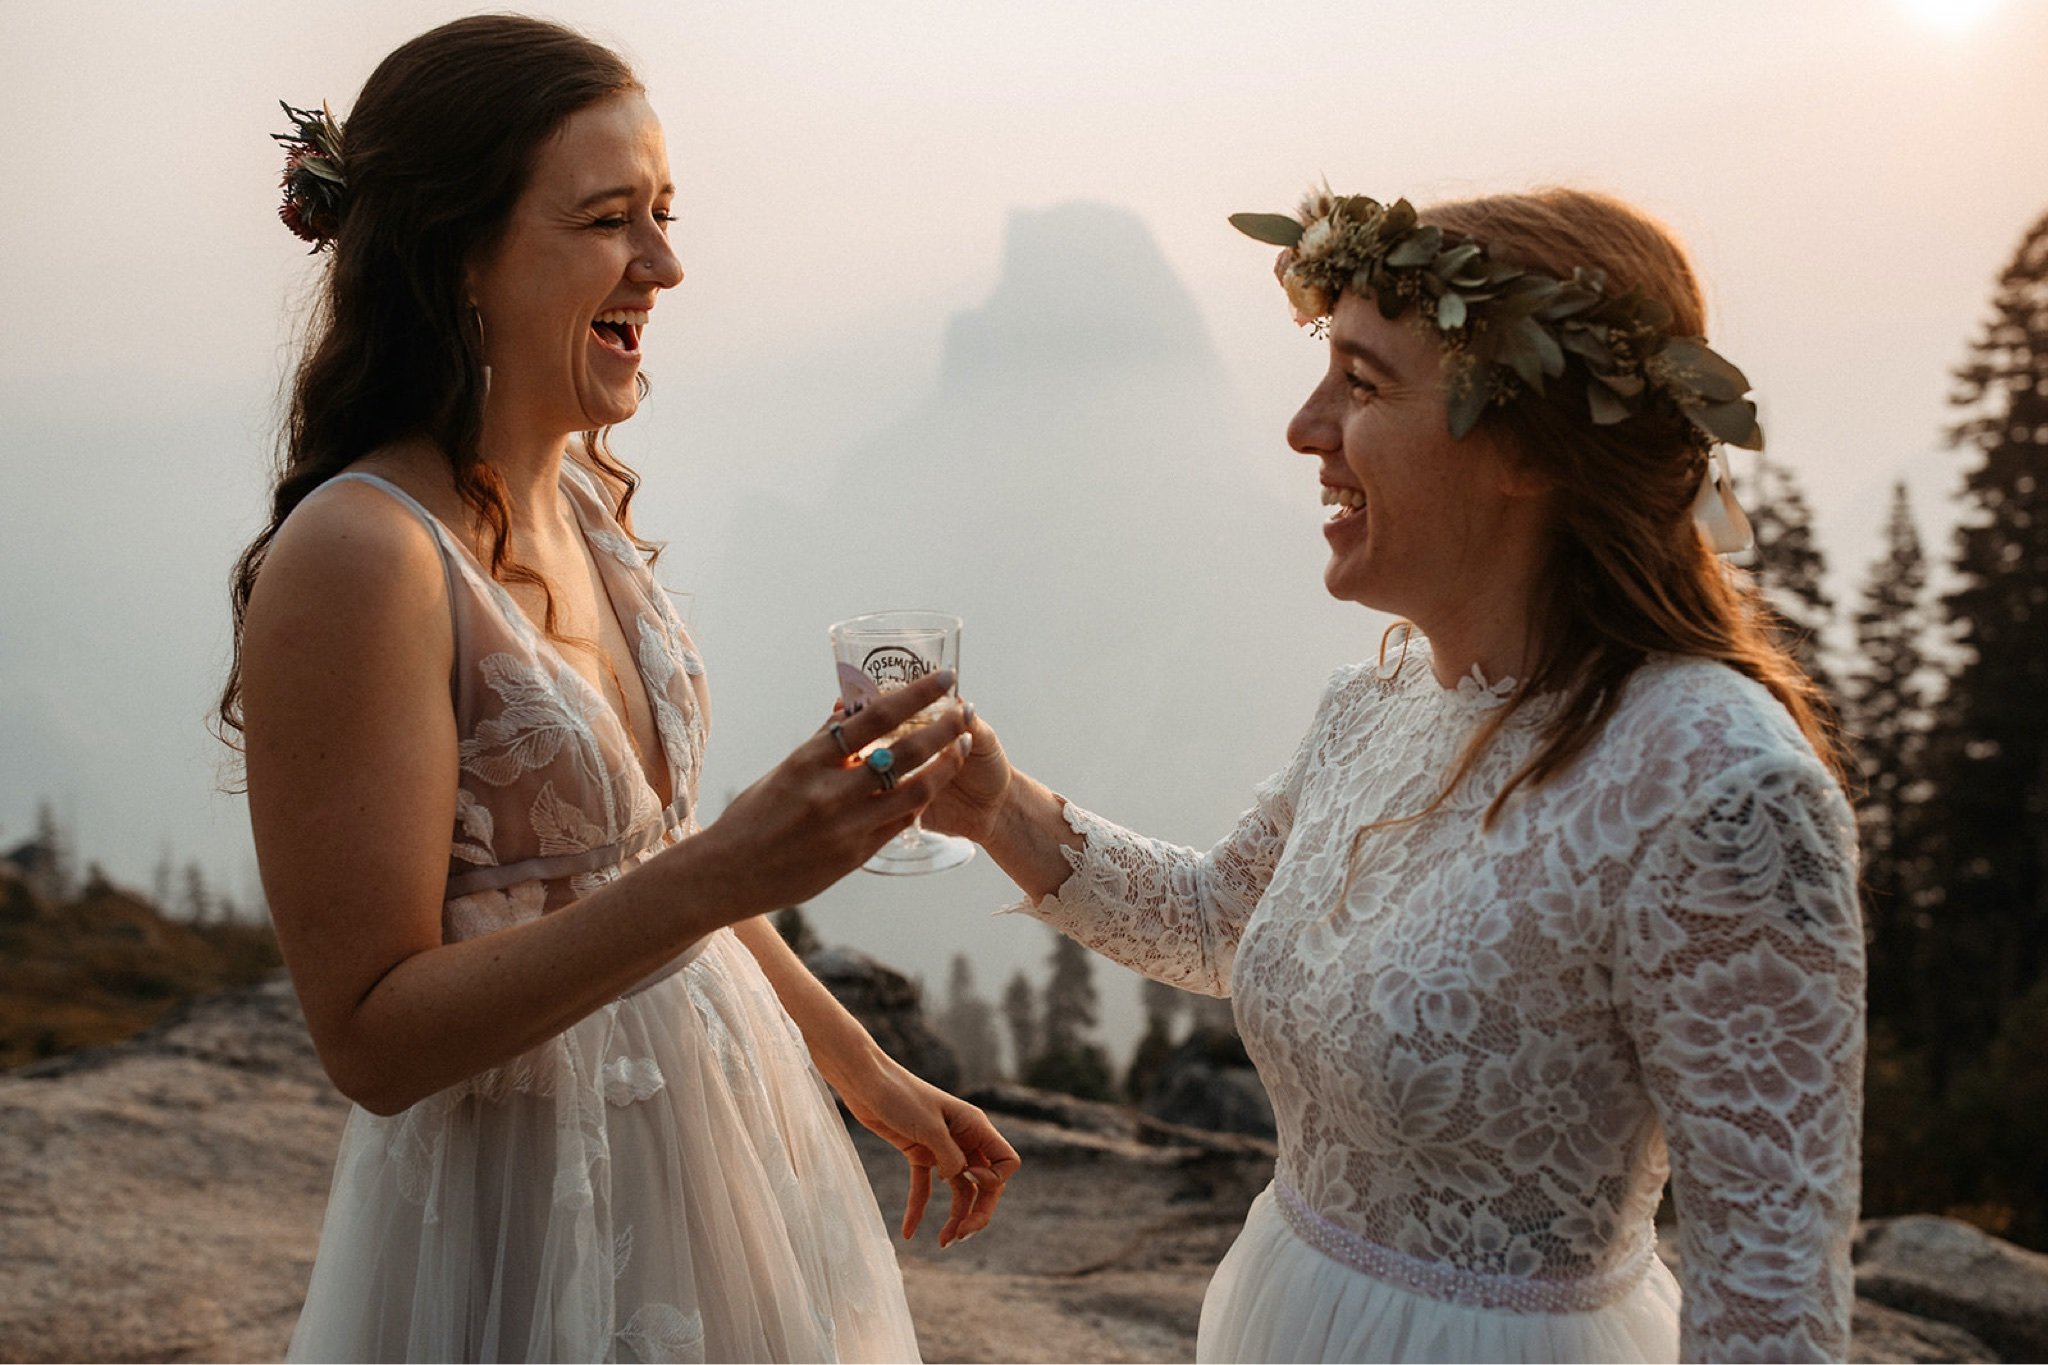 Yosemite National Park Elopement with Two Brides-Will Khoury84.jpg